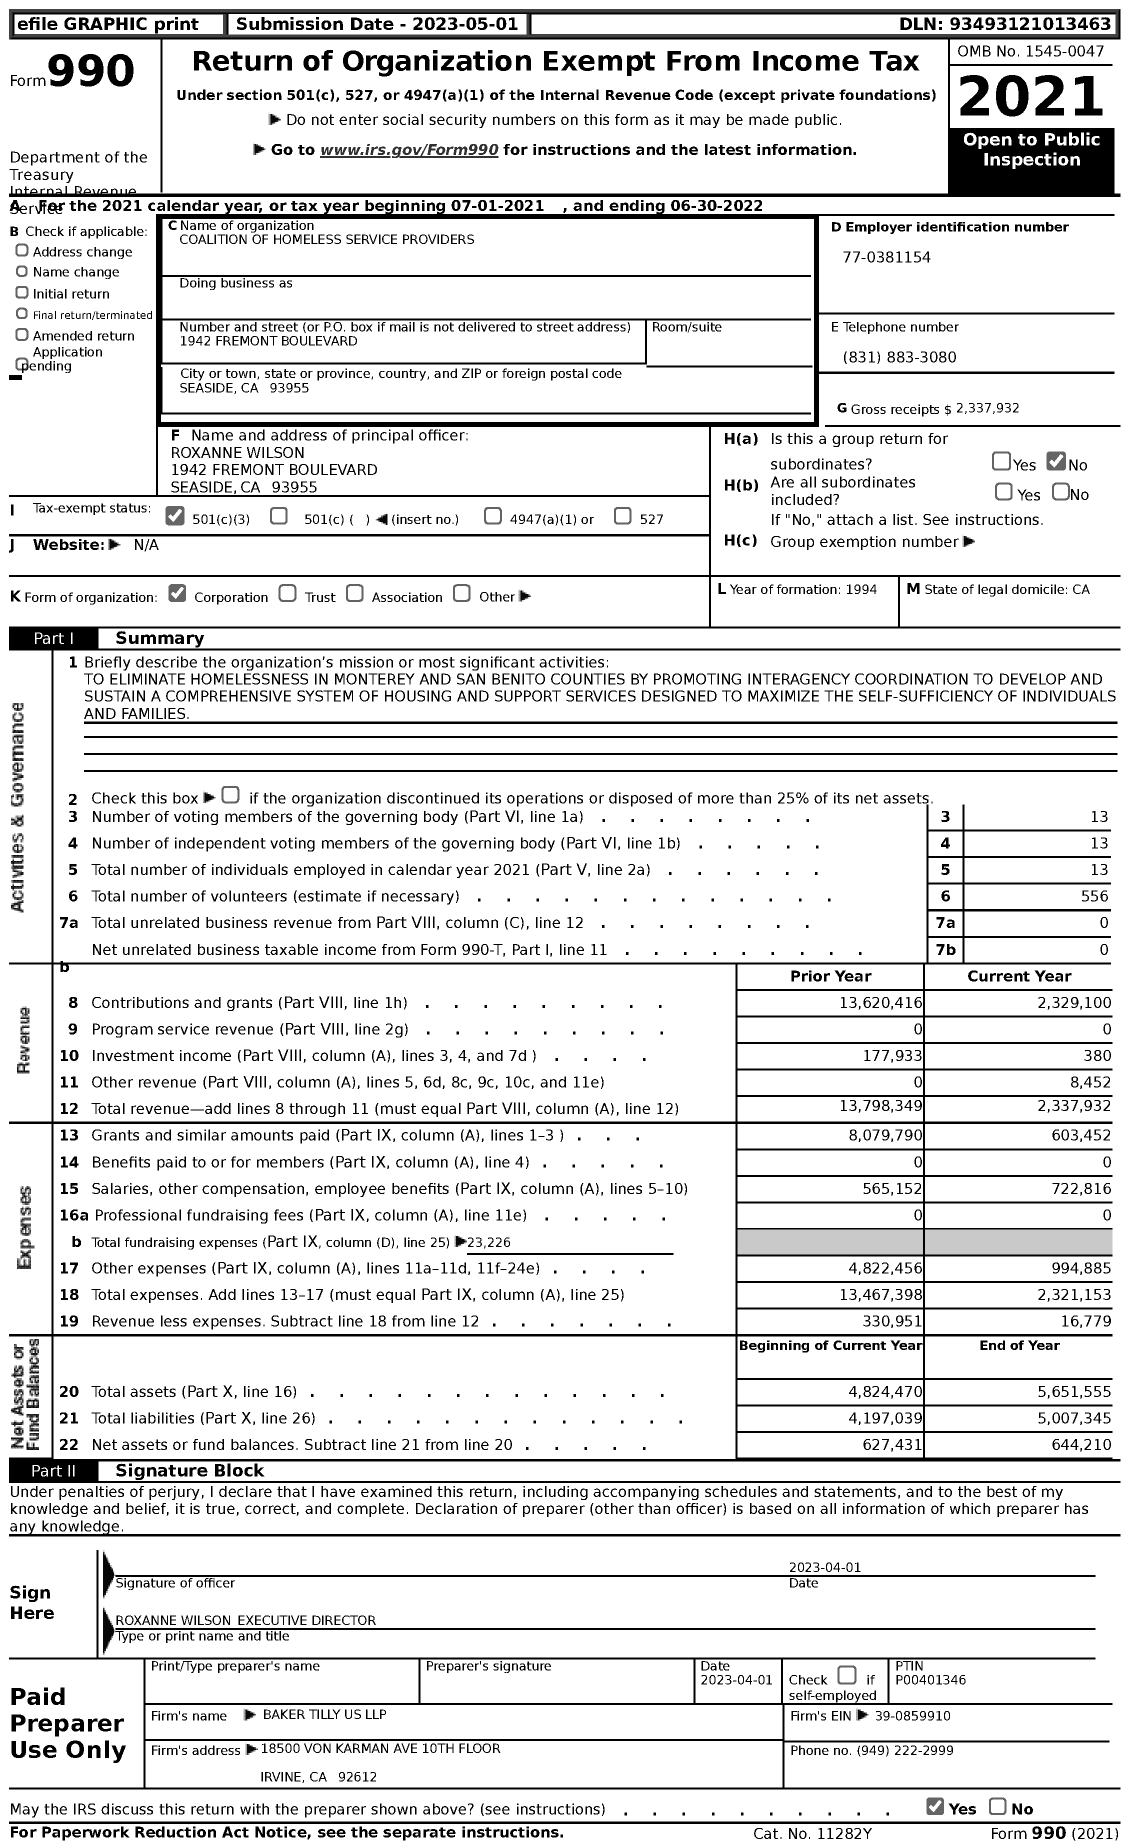 Image of first page of 2021 Form 990 for Coalition of Homeless Services Providers